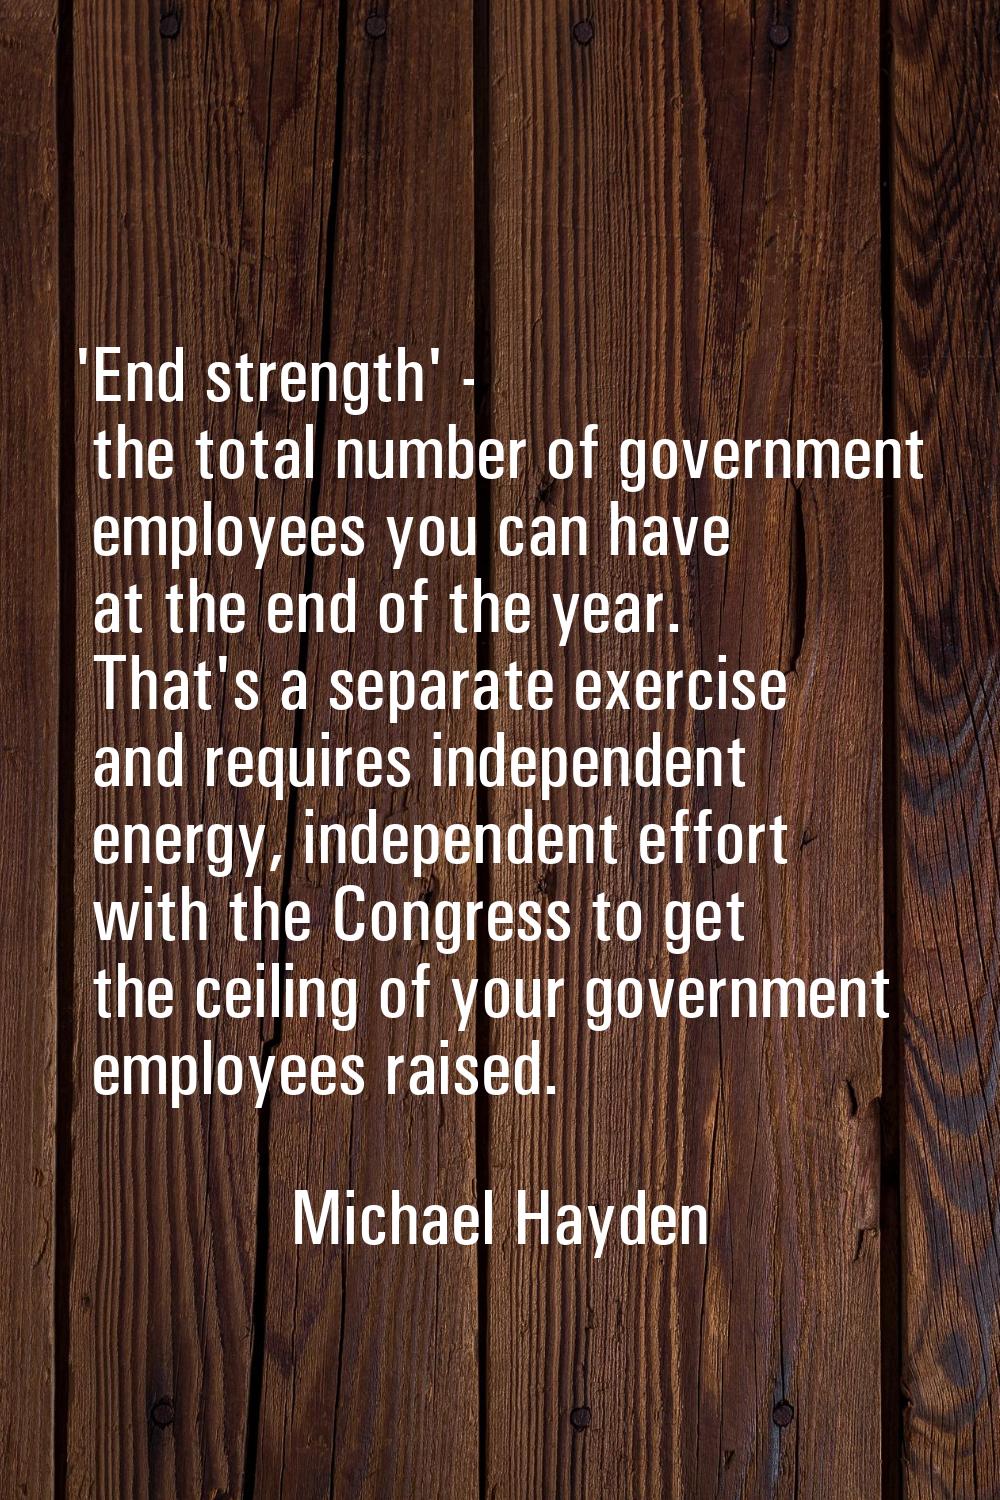 'End strength' - the total number of government employees you can have at the end of the year. That